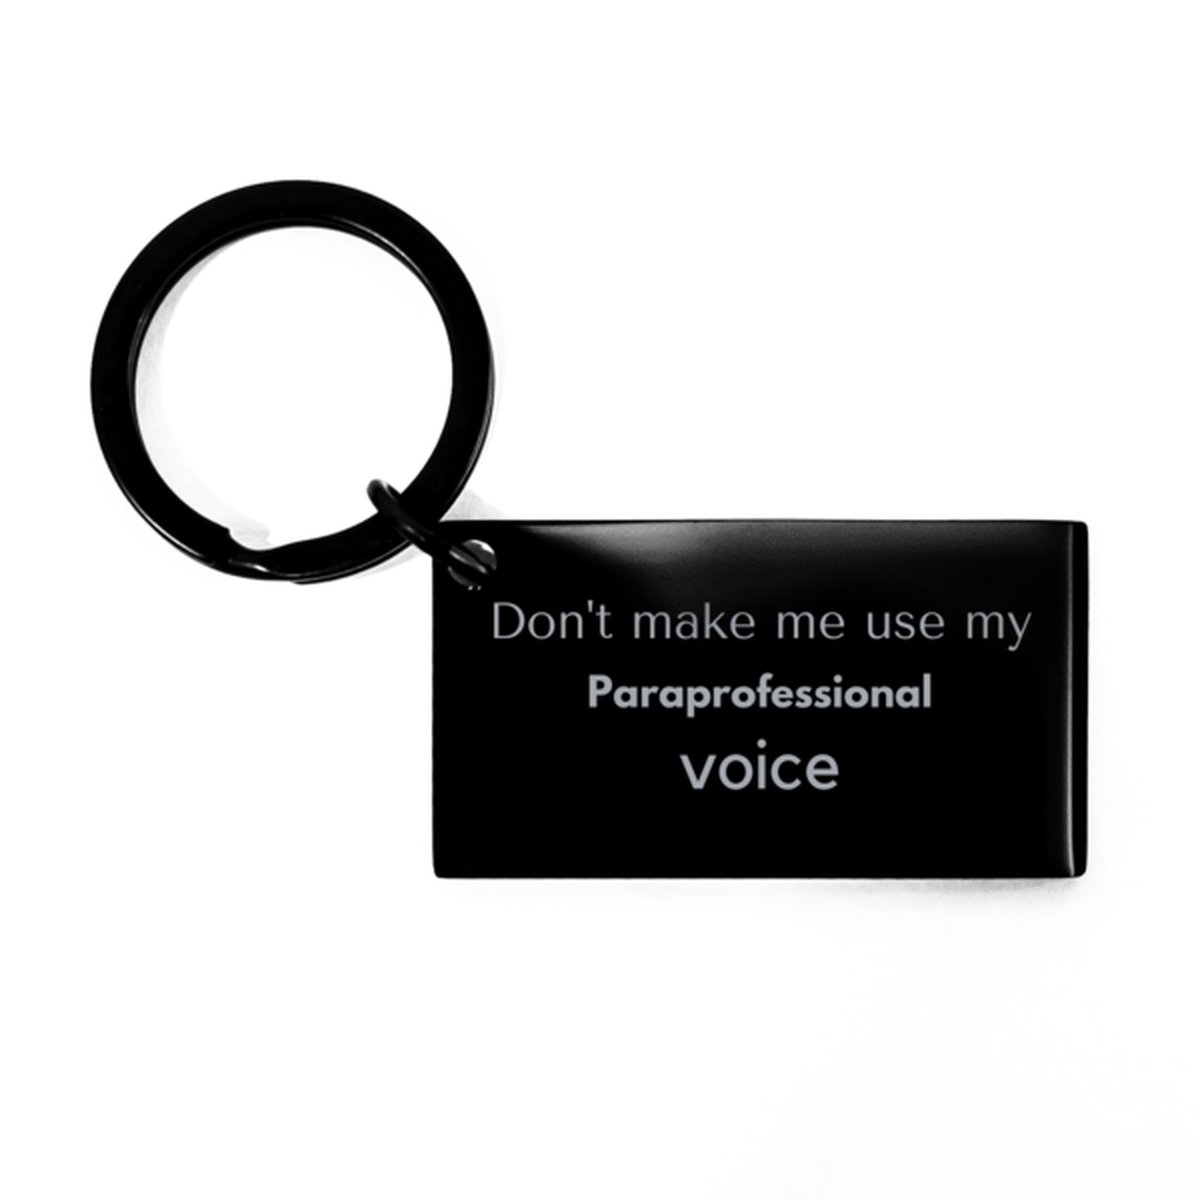 Don't make me use my Paraprofessional voice, Sarcasm Paraprofessional Gifts, Christmas Paraprofessional Keychain Birthday Unique Gifts For Paraprofessional Coworkers, Men, Women, Colleague, Friends